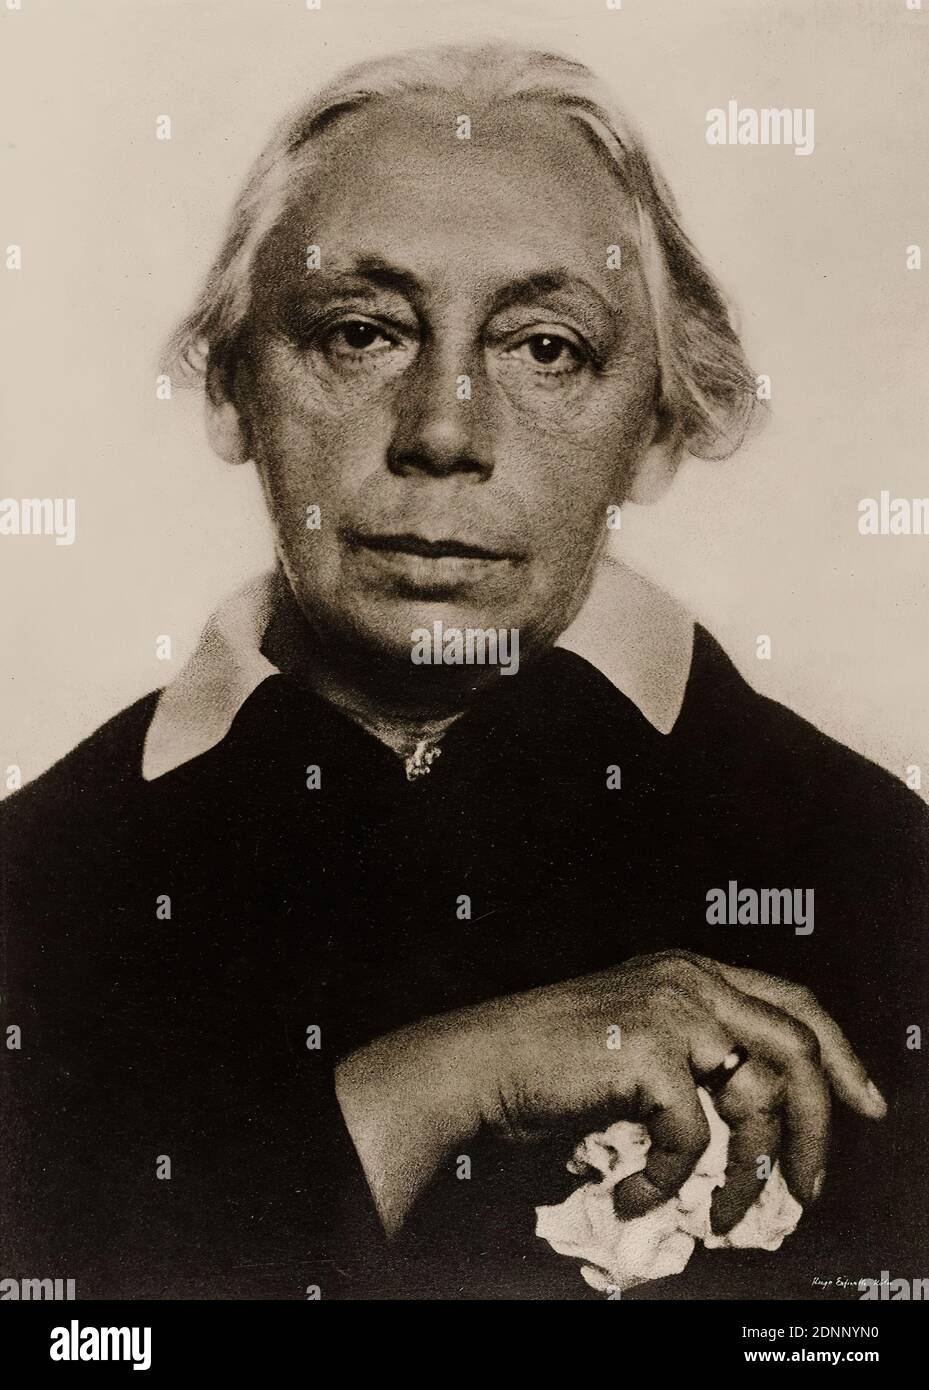 Hugo Erfurth, Käthe Kollwitz, from the album Ausstellung Hugo Erfurth - Bildnisse aus dem XX. Jahrhundert, Konstanz 1949, paper, oil print, image size: height: 29,5 cm; width: 21,2 cm, signed and inscribed: recto u. re.: eingeritzt: Hugo Erfurth, Cologne, Label: Passepartout recto u. in the middle: in typescript on Japan paper: H u g o E r f u r t h, 'Käthe Kollwitz', Portrait photography, portrait, artist, woman, portrait, self-portrait of an artist, At the beginning of the 20th century, Hugo Erfurth was one of the most famous professional photographers in Germany, alongside Rudolph Dührkoop Stock Photo